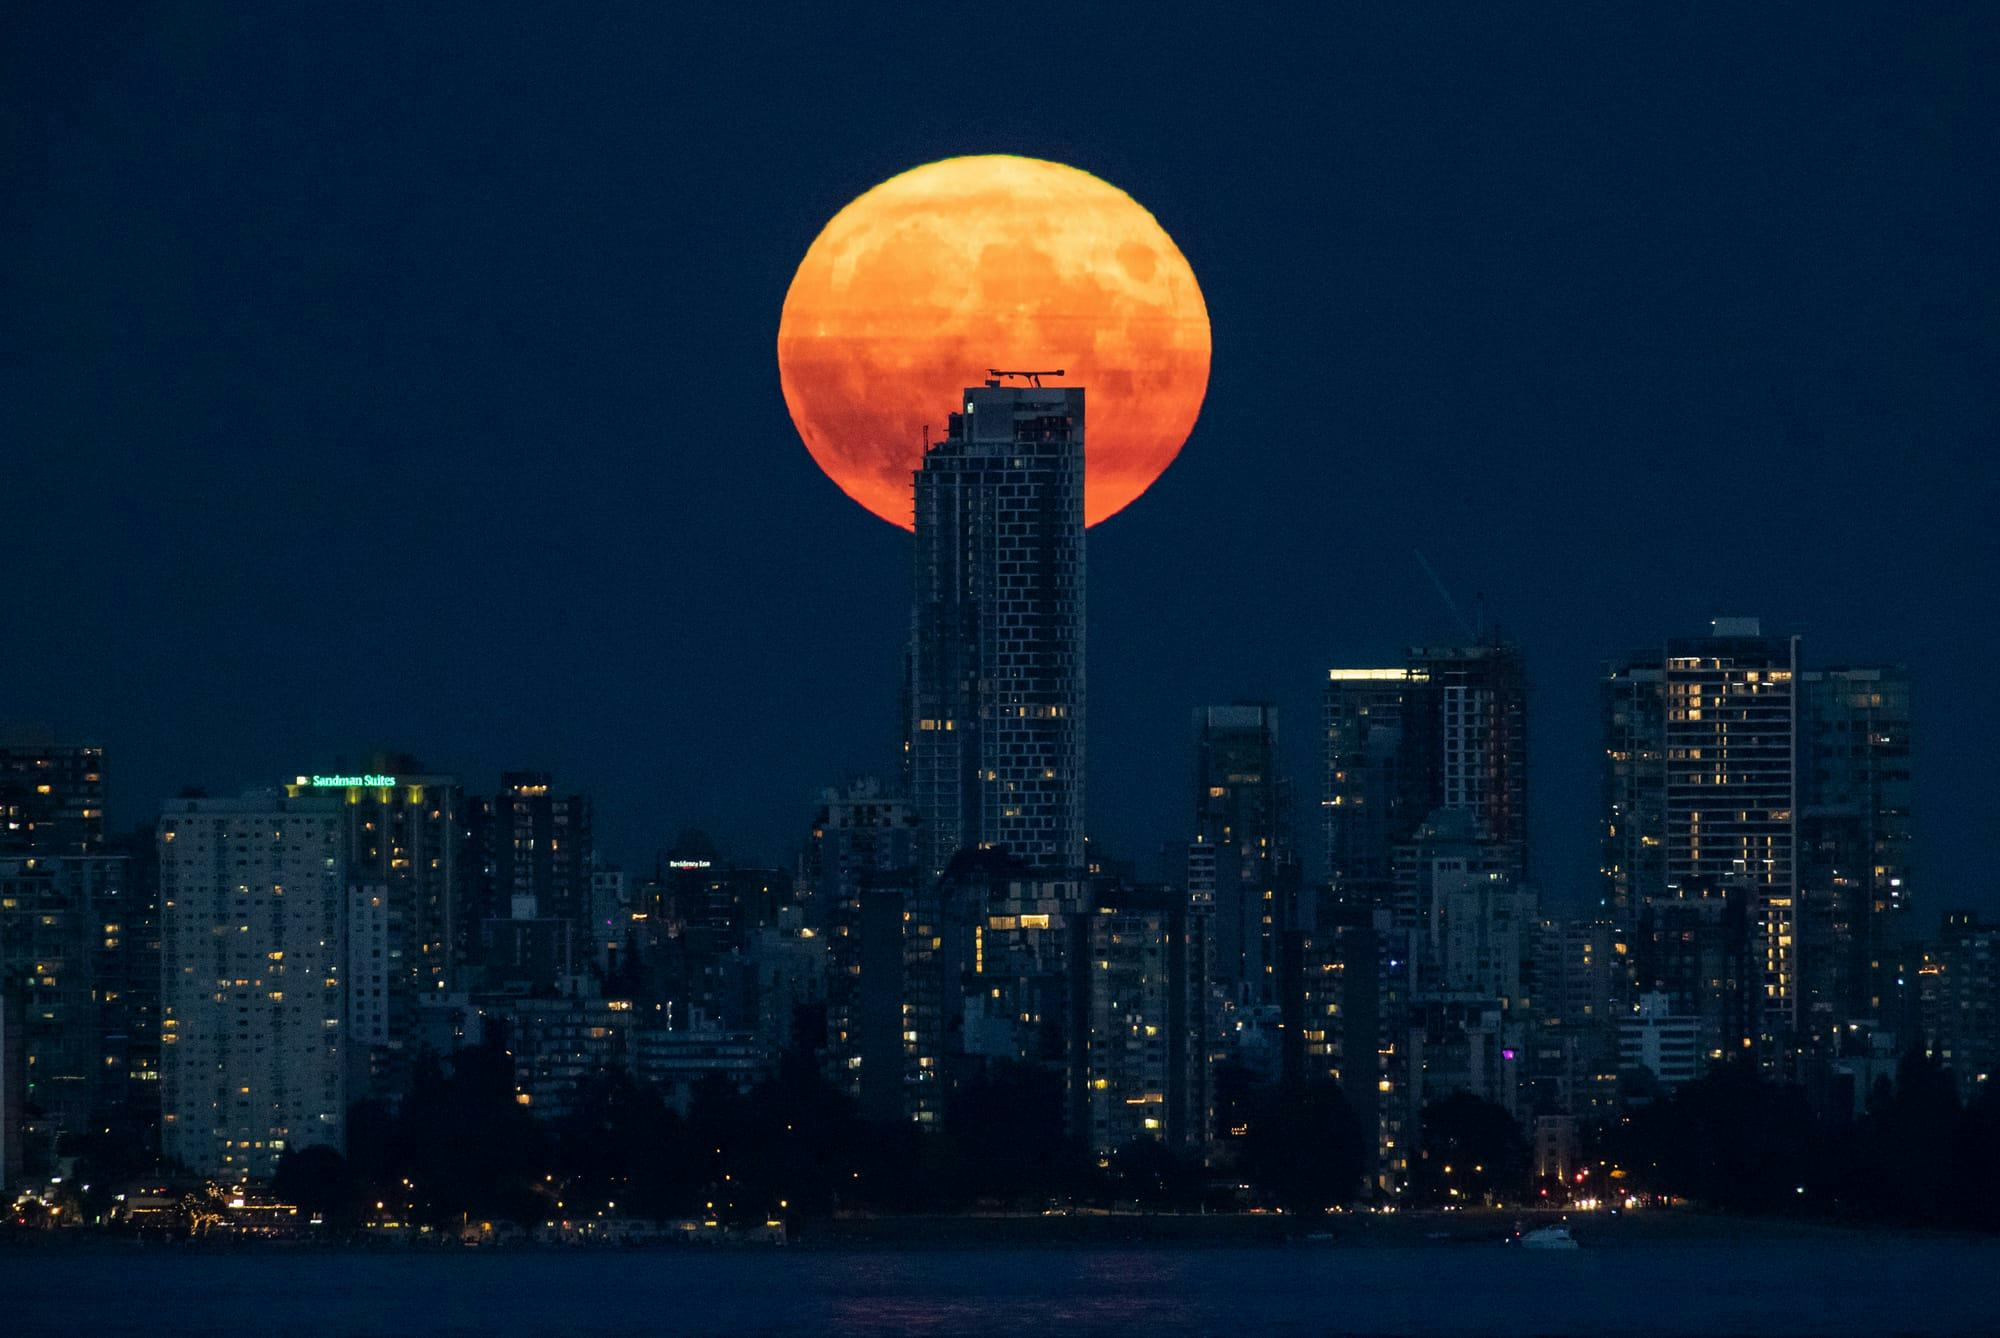 A bright orange full moon rises behind a condo tower in a nighttime photo of the downtown Vancouver skyline.